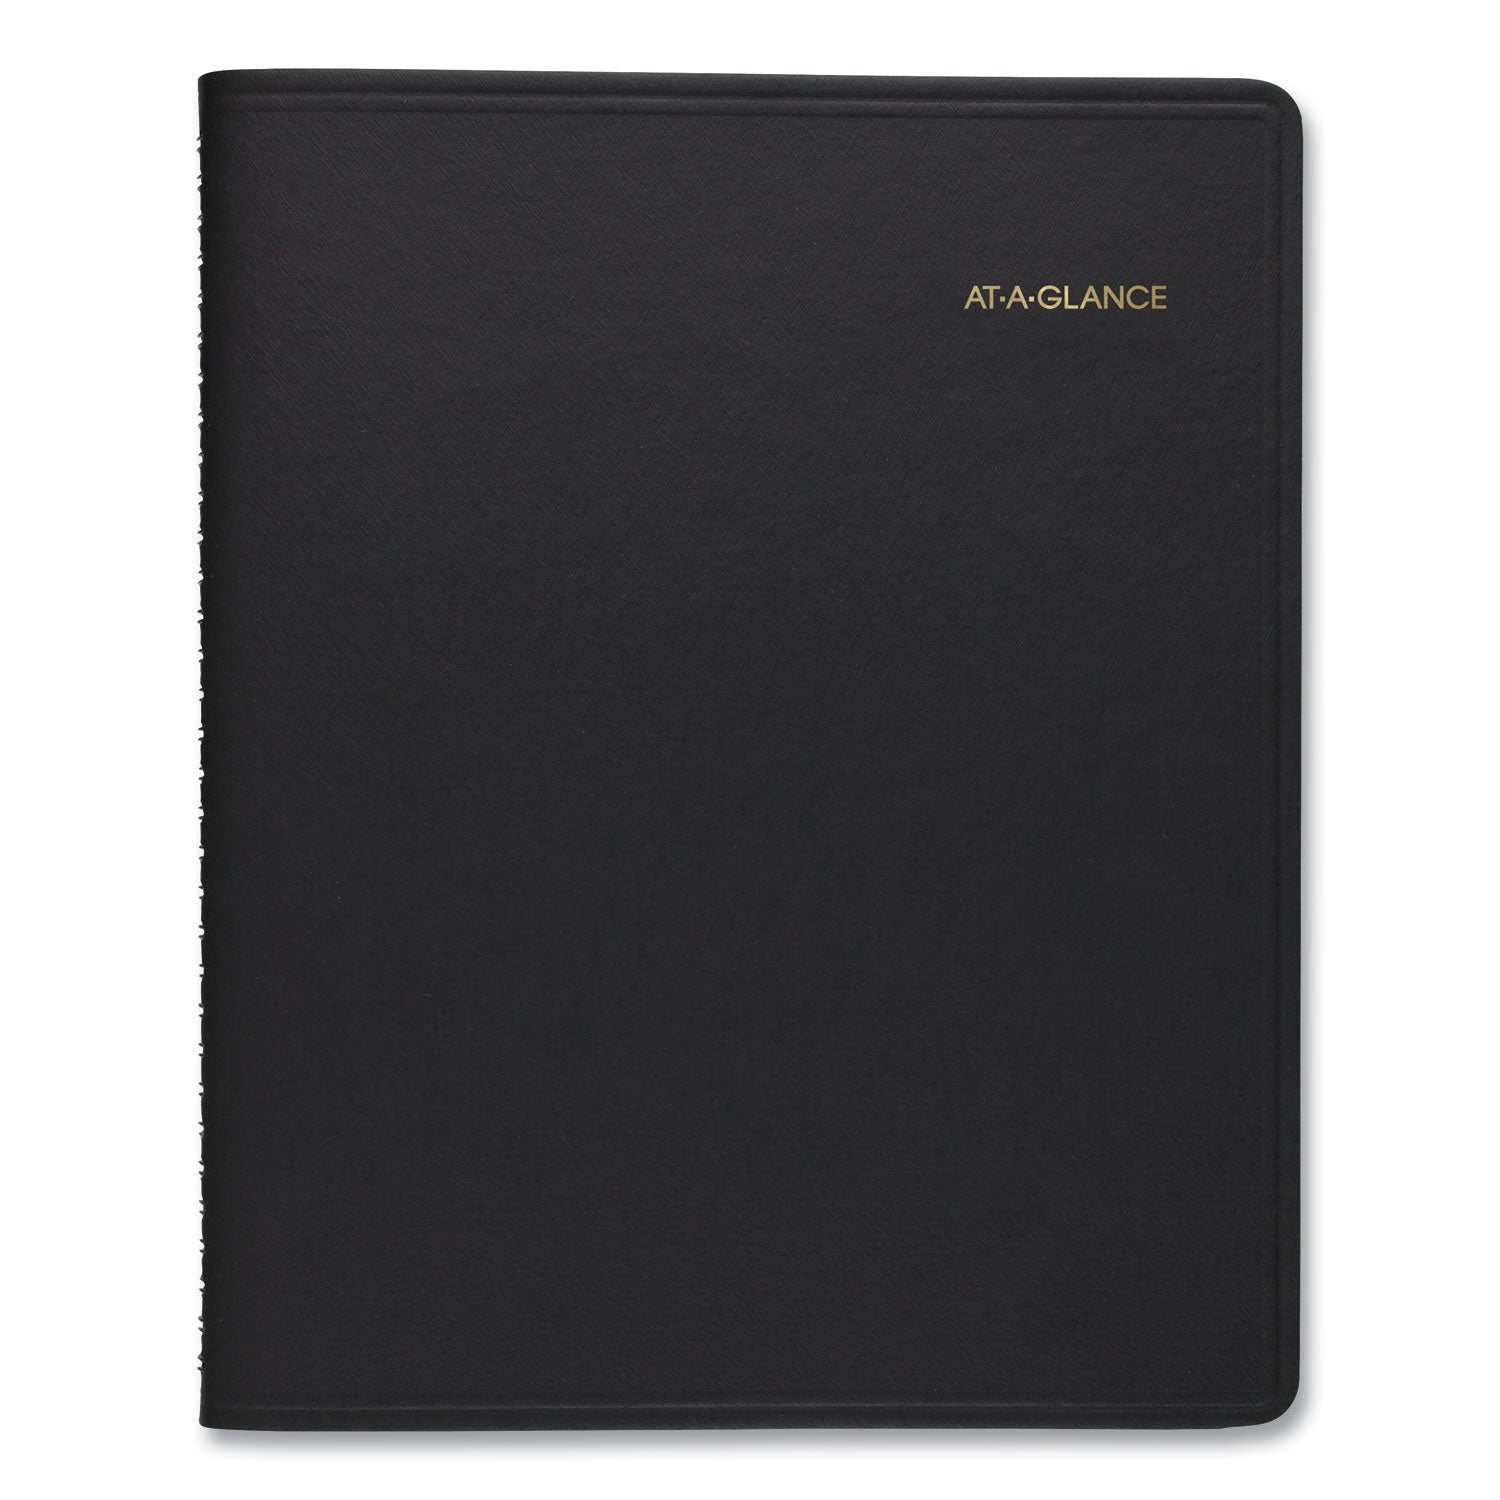 At-A-Glance 24-HourAppointment Book Planner - Daily - January 2024 - December 2024 - 12:00 AM to 11:00 PM - Hourly - 1 Day Single Page Layout - 8 1/2" x 11" Sheet Size - Wire Bound - Simulated Leather - Black CoverNotepad - 1 Each - 2